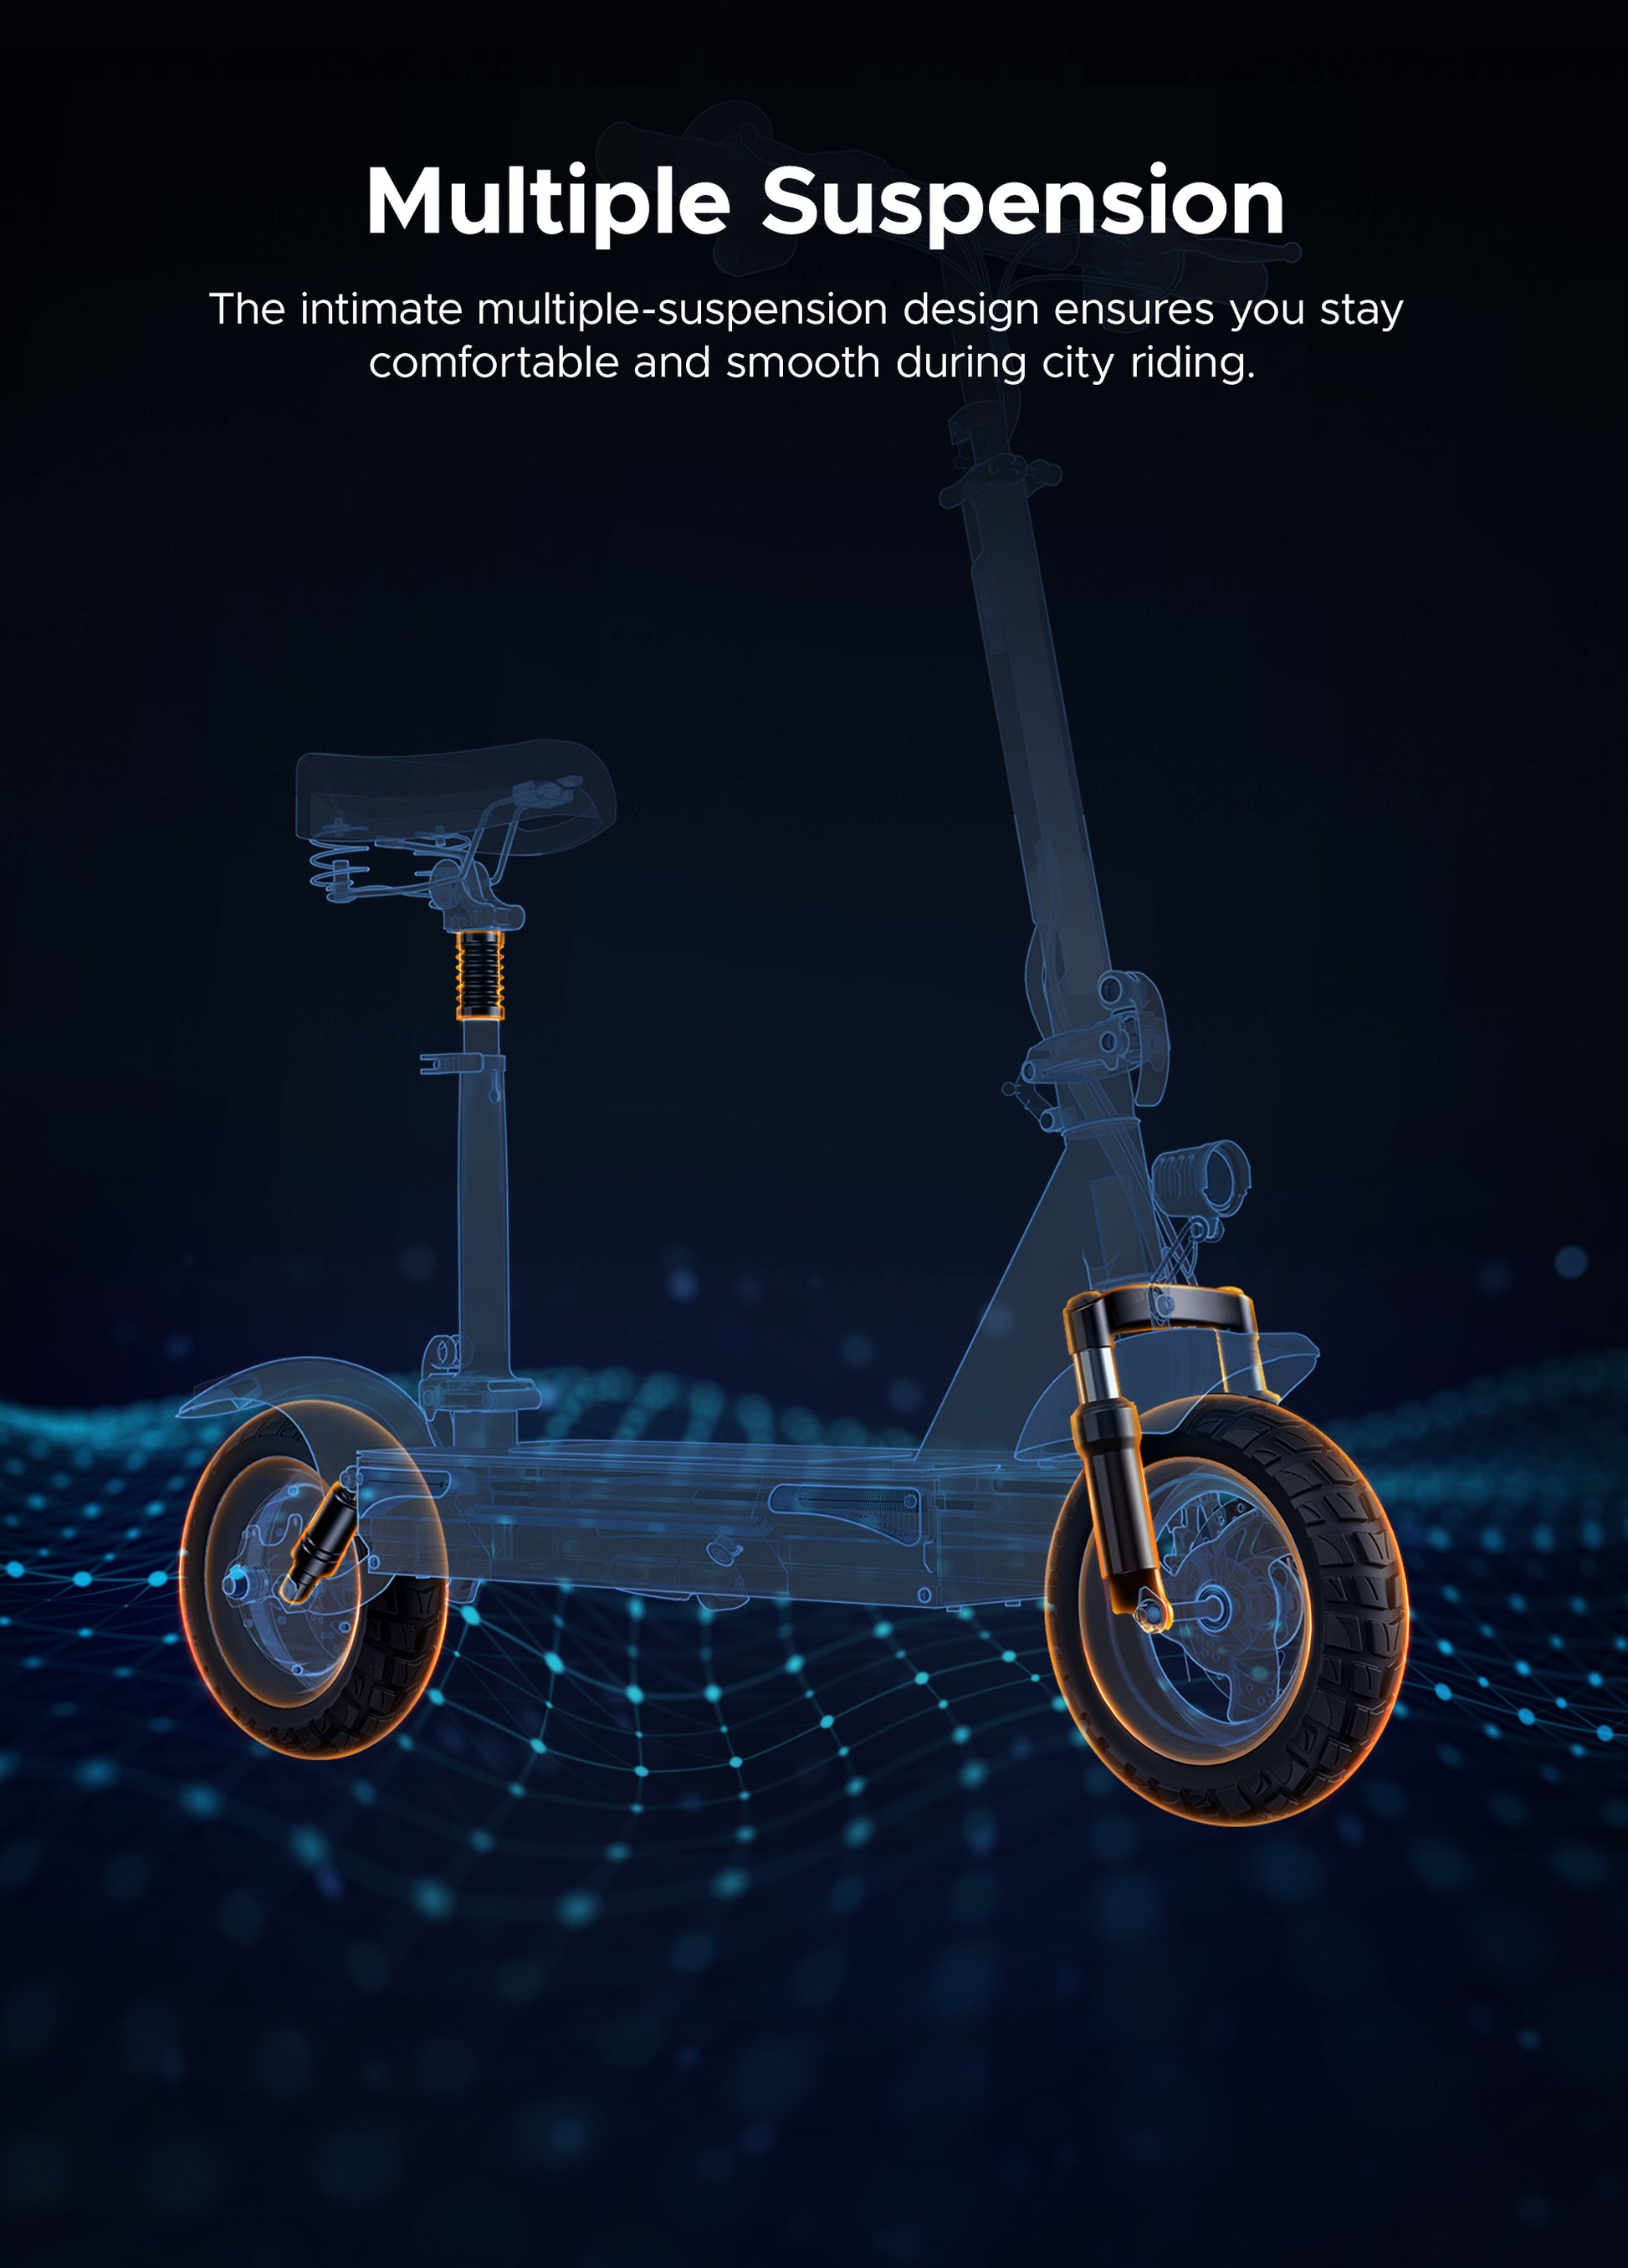 X-ray view of Engwe S6 e-scooter's multiple suspension system for a smooth ride